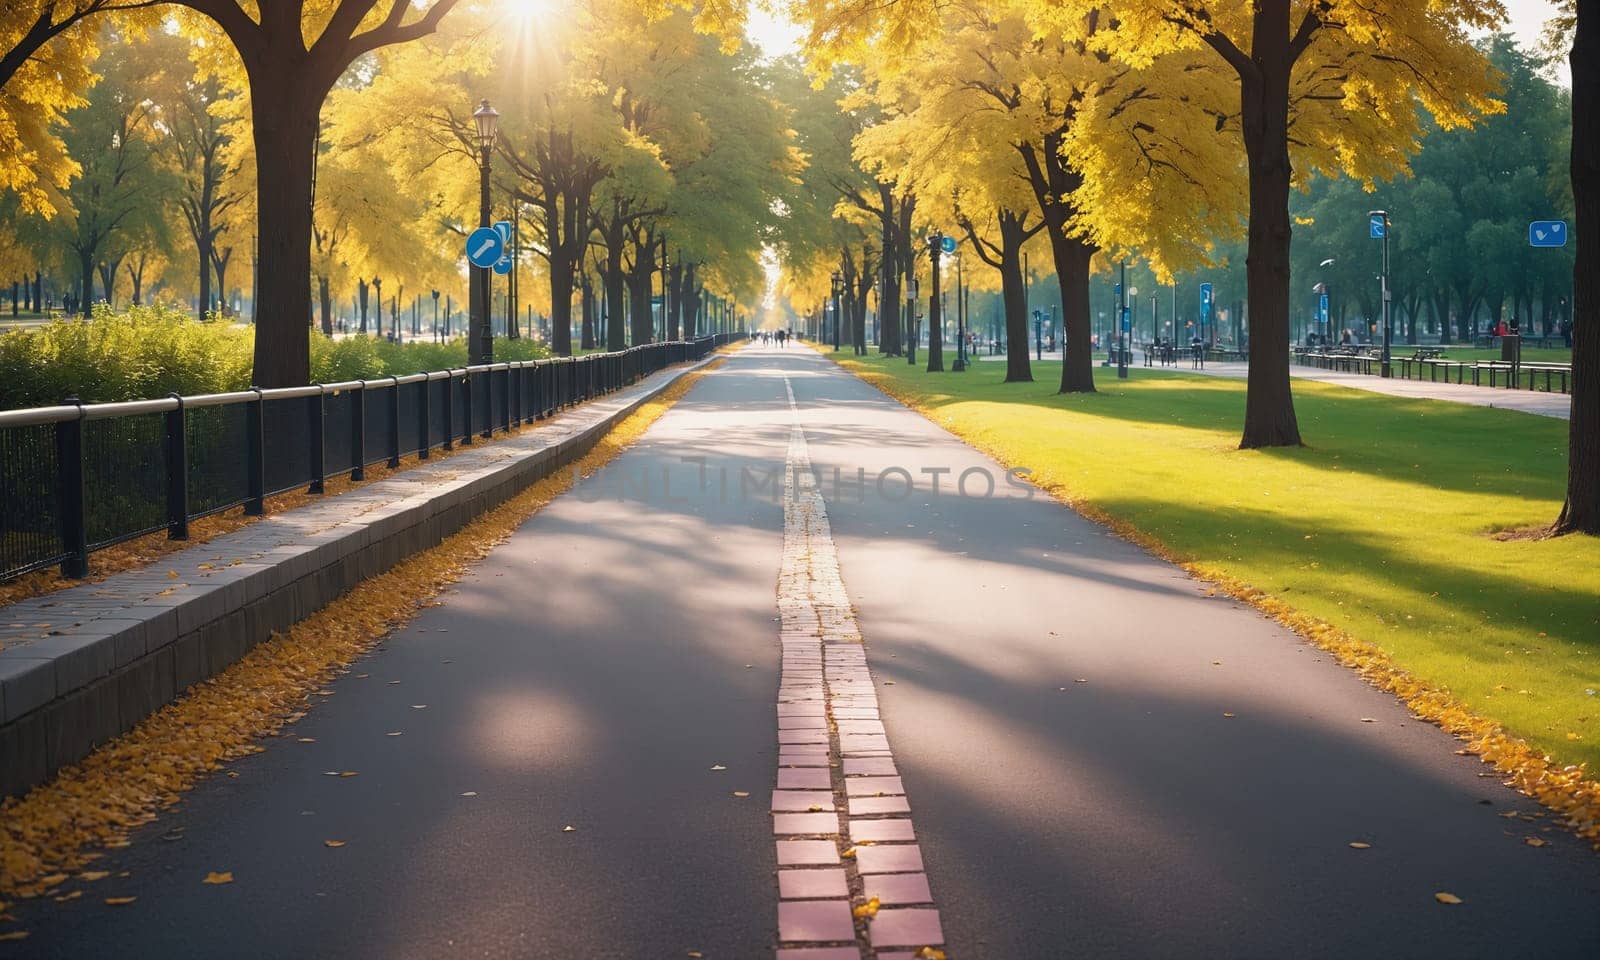 Sunlit Autumn Bicycle Path in Park by Andre1ns